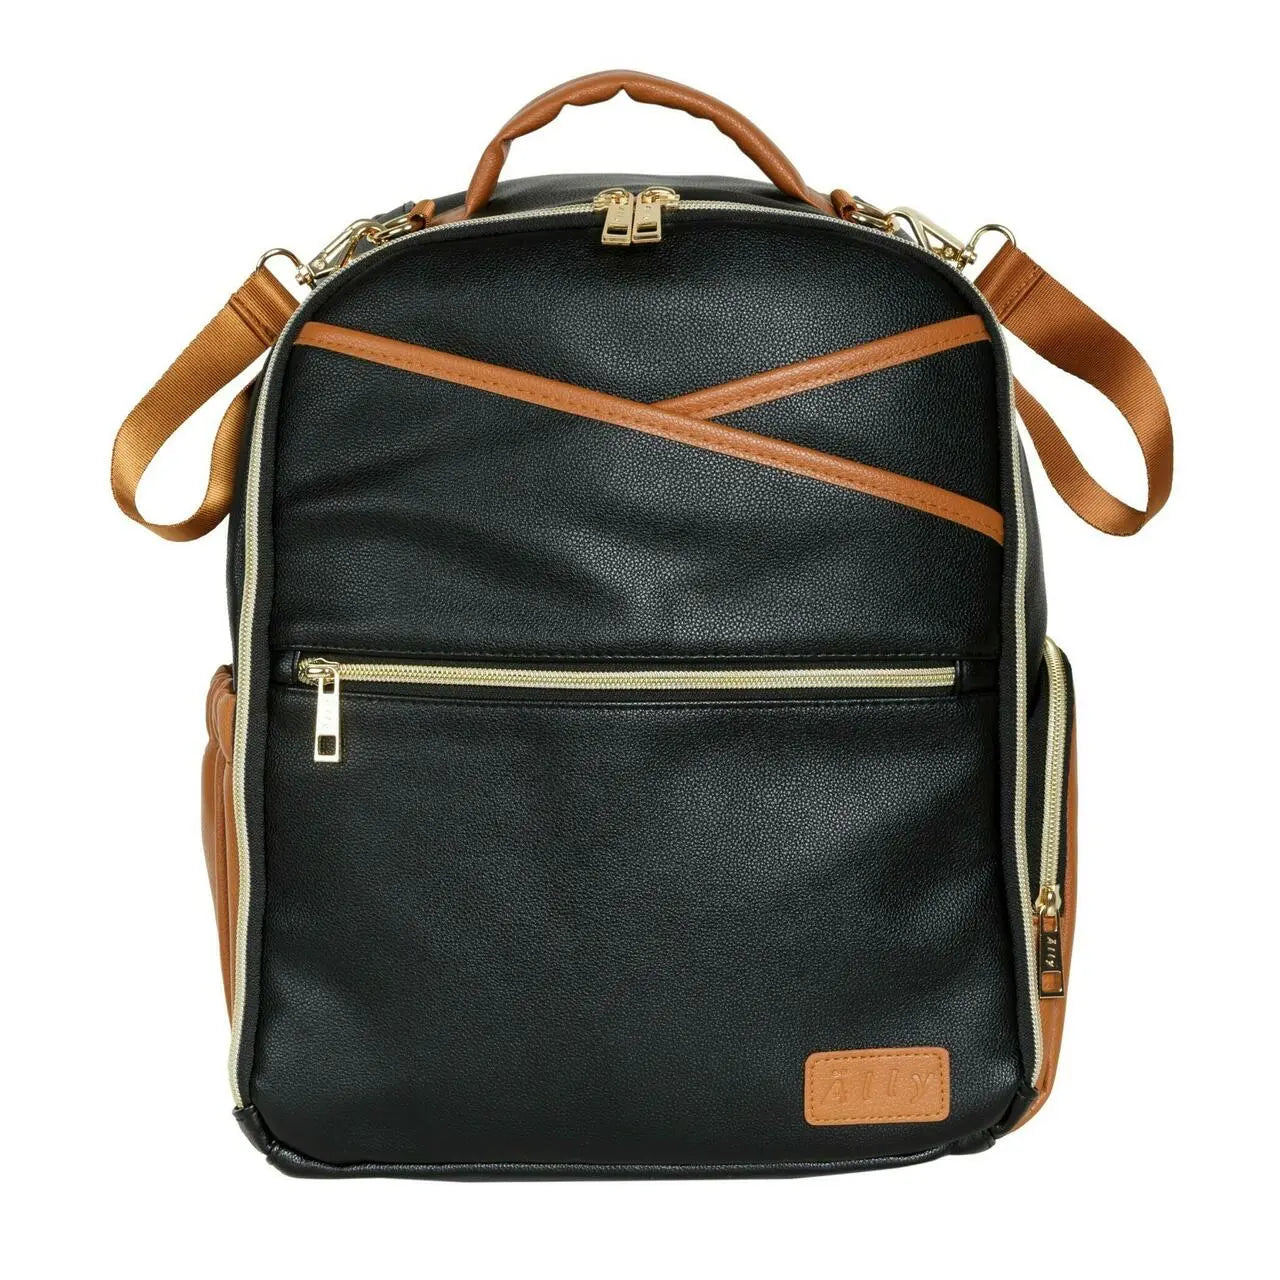 A black and brown Small Diaper Backpack by Ally Scandic, featuring a leather tag, gold zippers, and adjustable shoulder straps for stylish, organized parenting on the go.